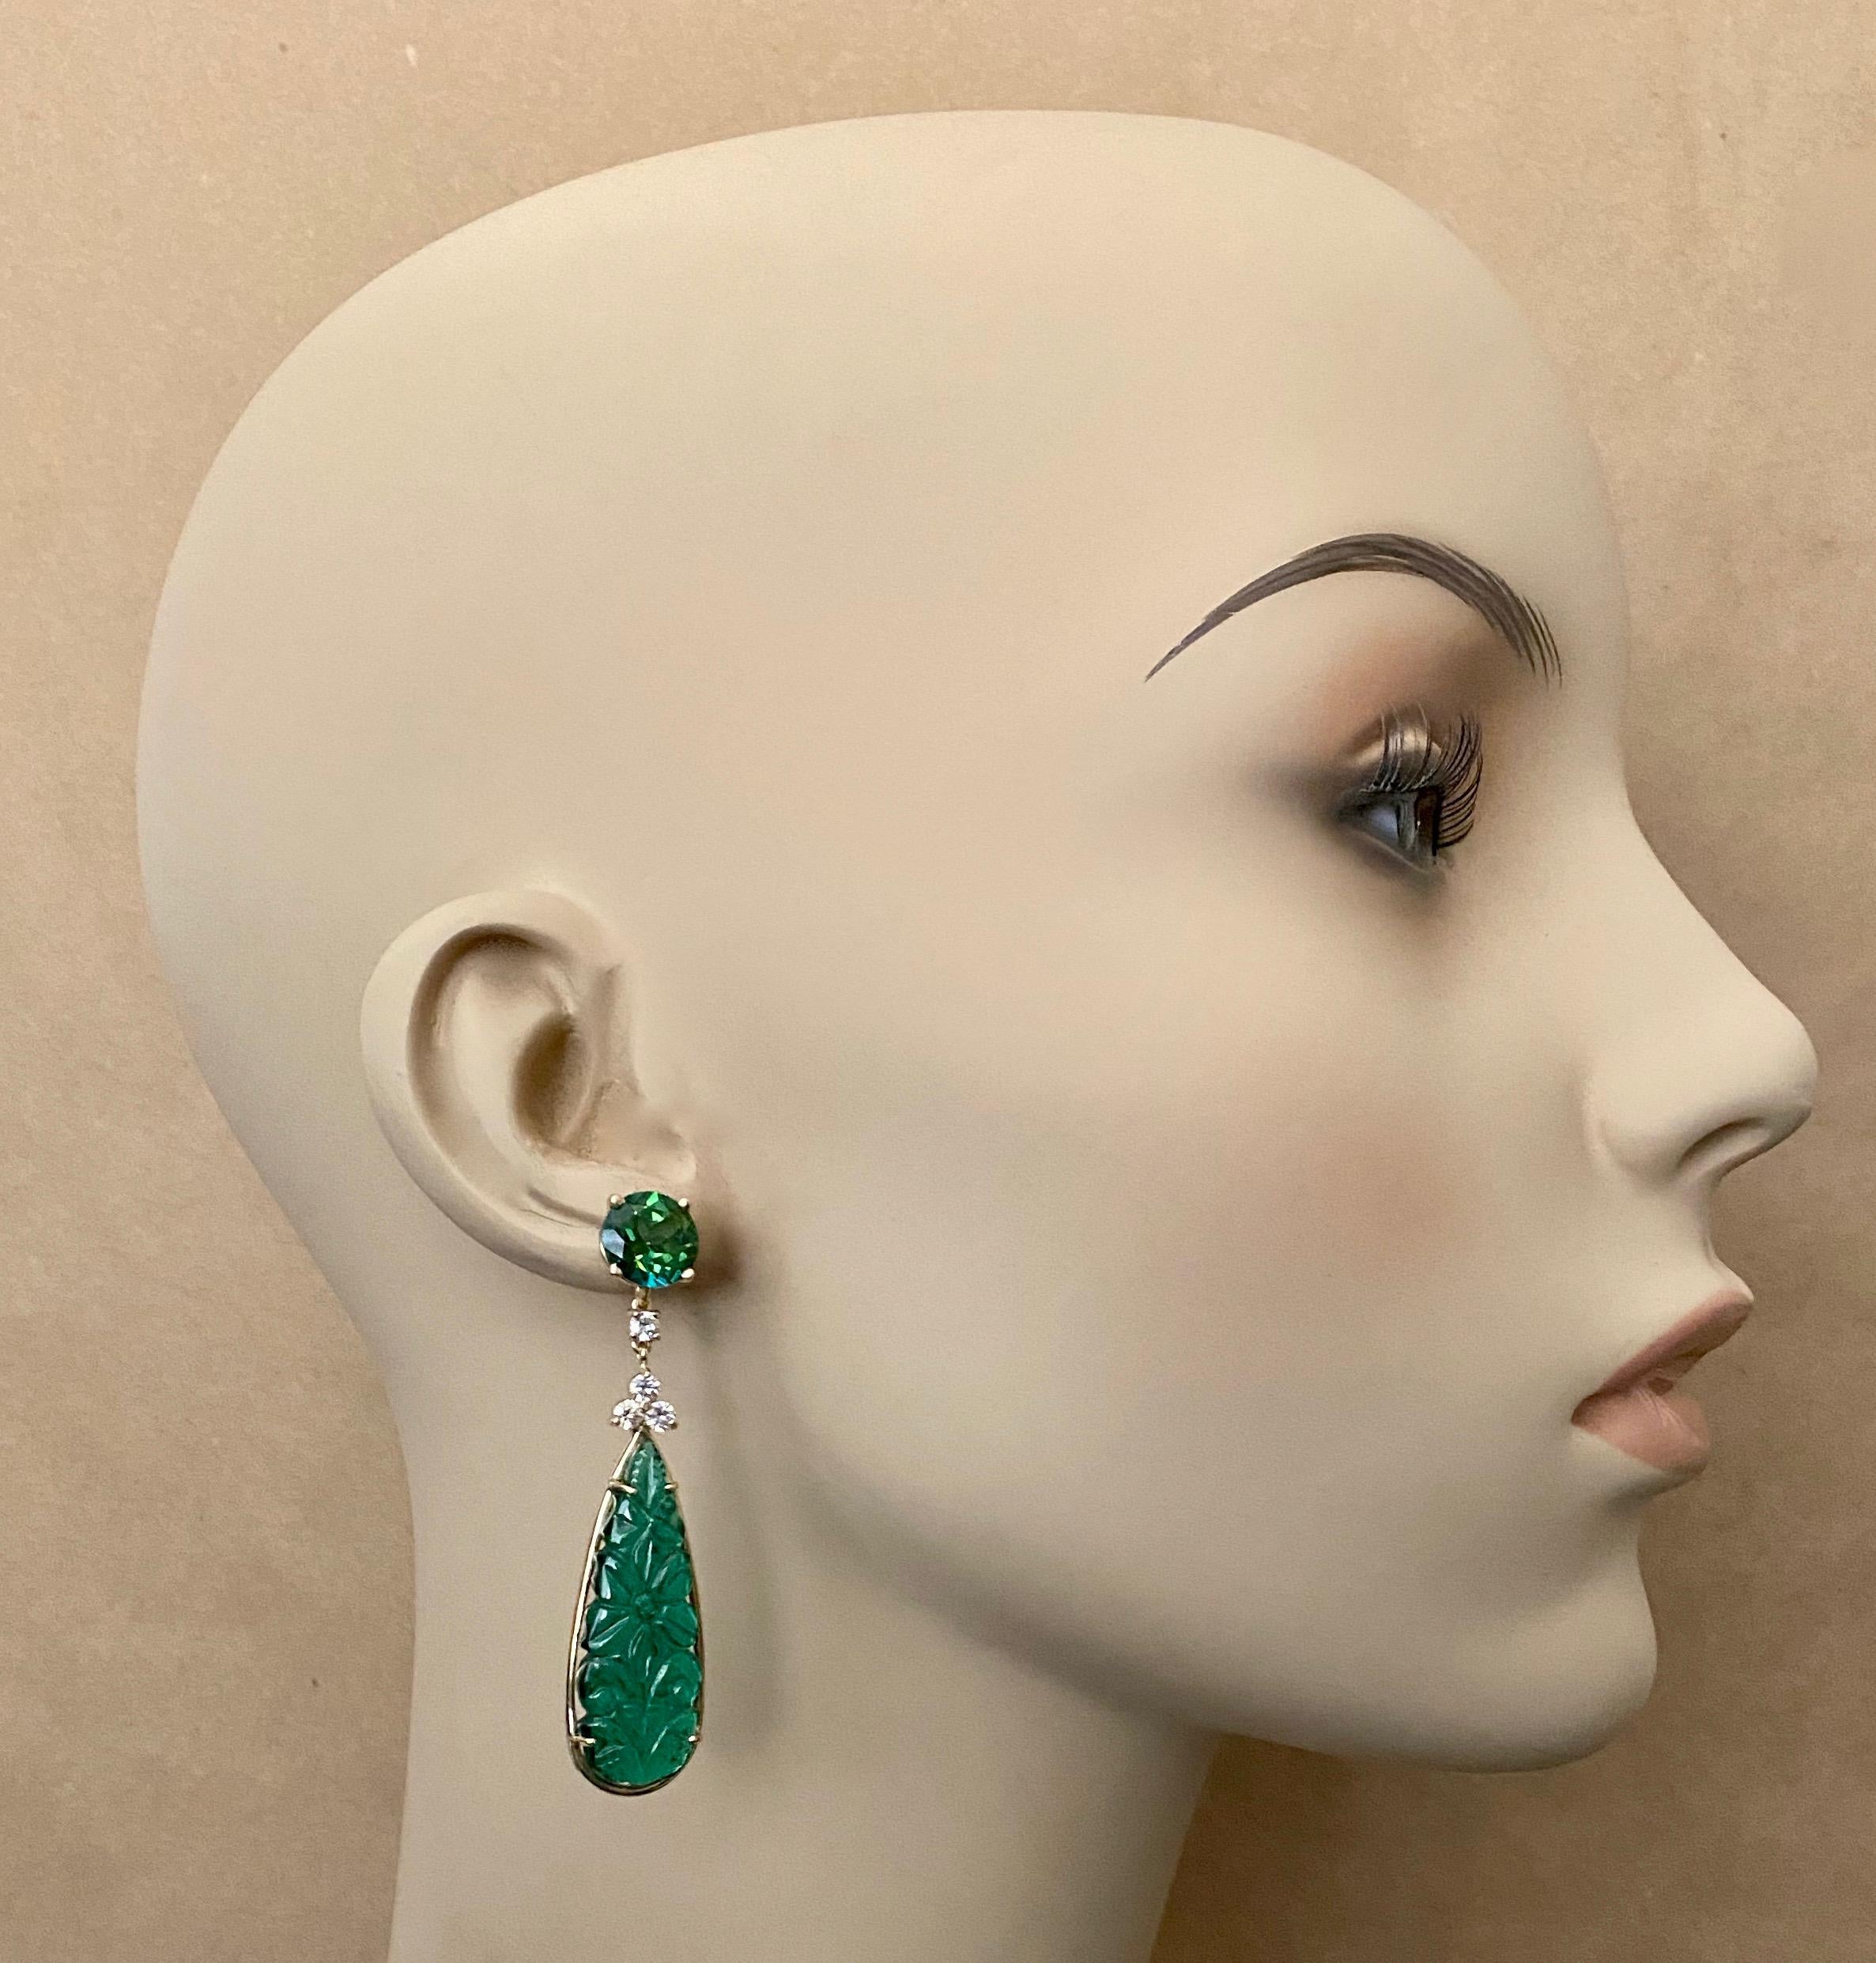 Green onyx drops are featured in these elegant dangle earrings.  The onyx (origin: Peru) is translucent, brilliant green and finely carved in a floral design in the Indian style.  The drops are complimented by bright green, flashy and brilliant cut